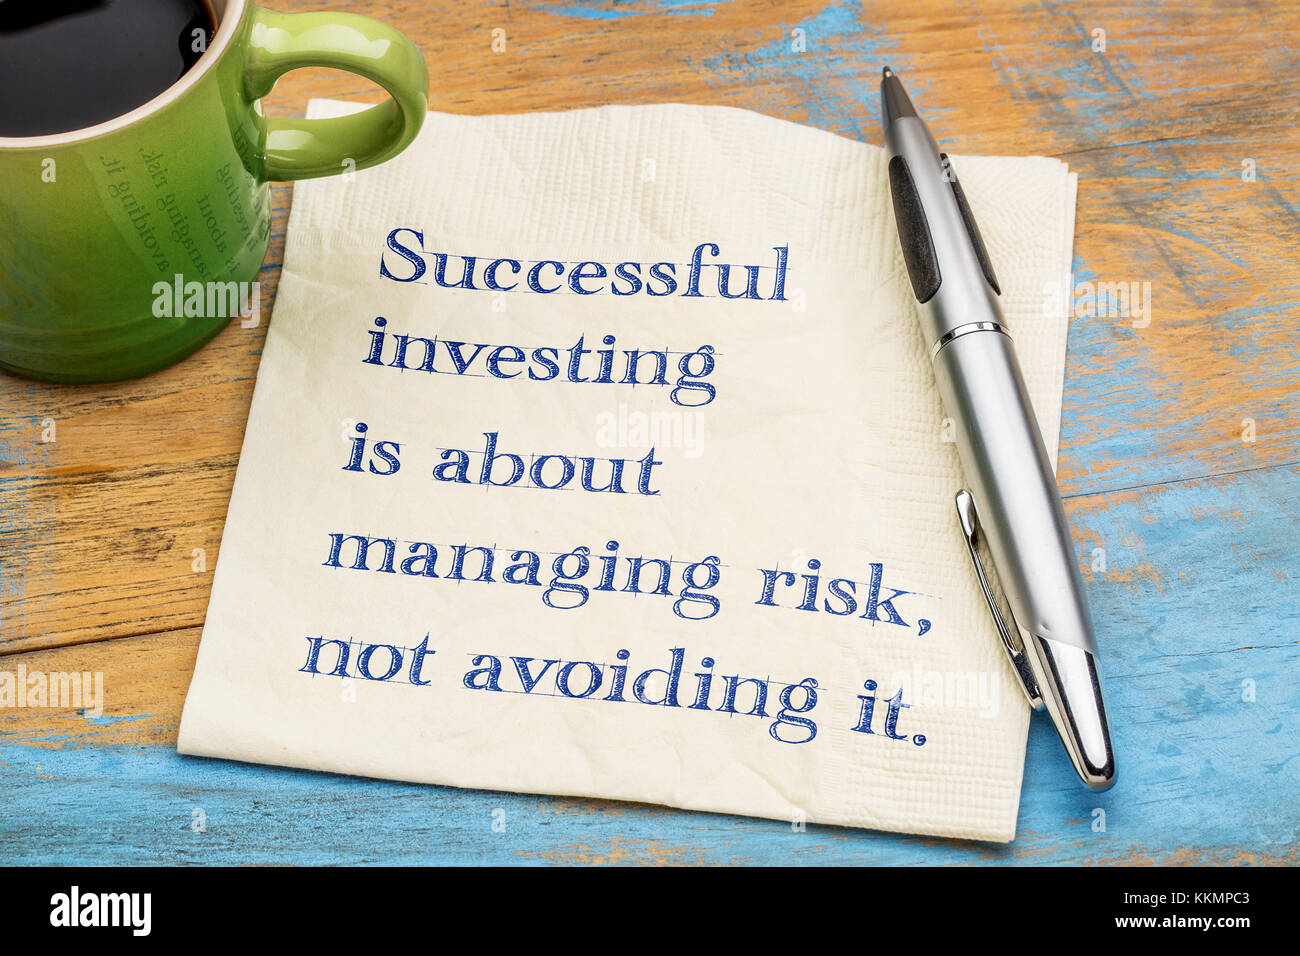 Successful investing is about managing risk, not avoiding it - handwriting on a napkin with a cup of coffee Stock Photo